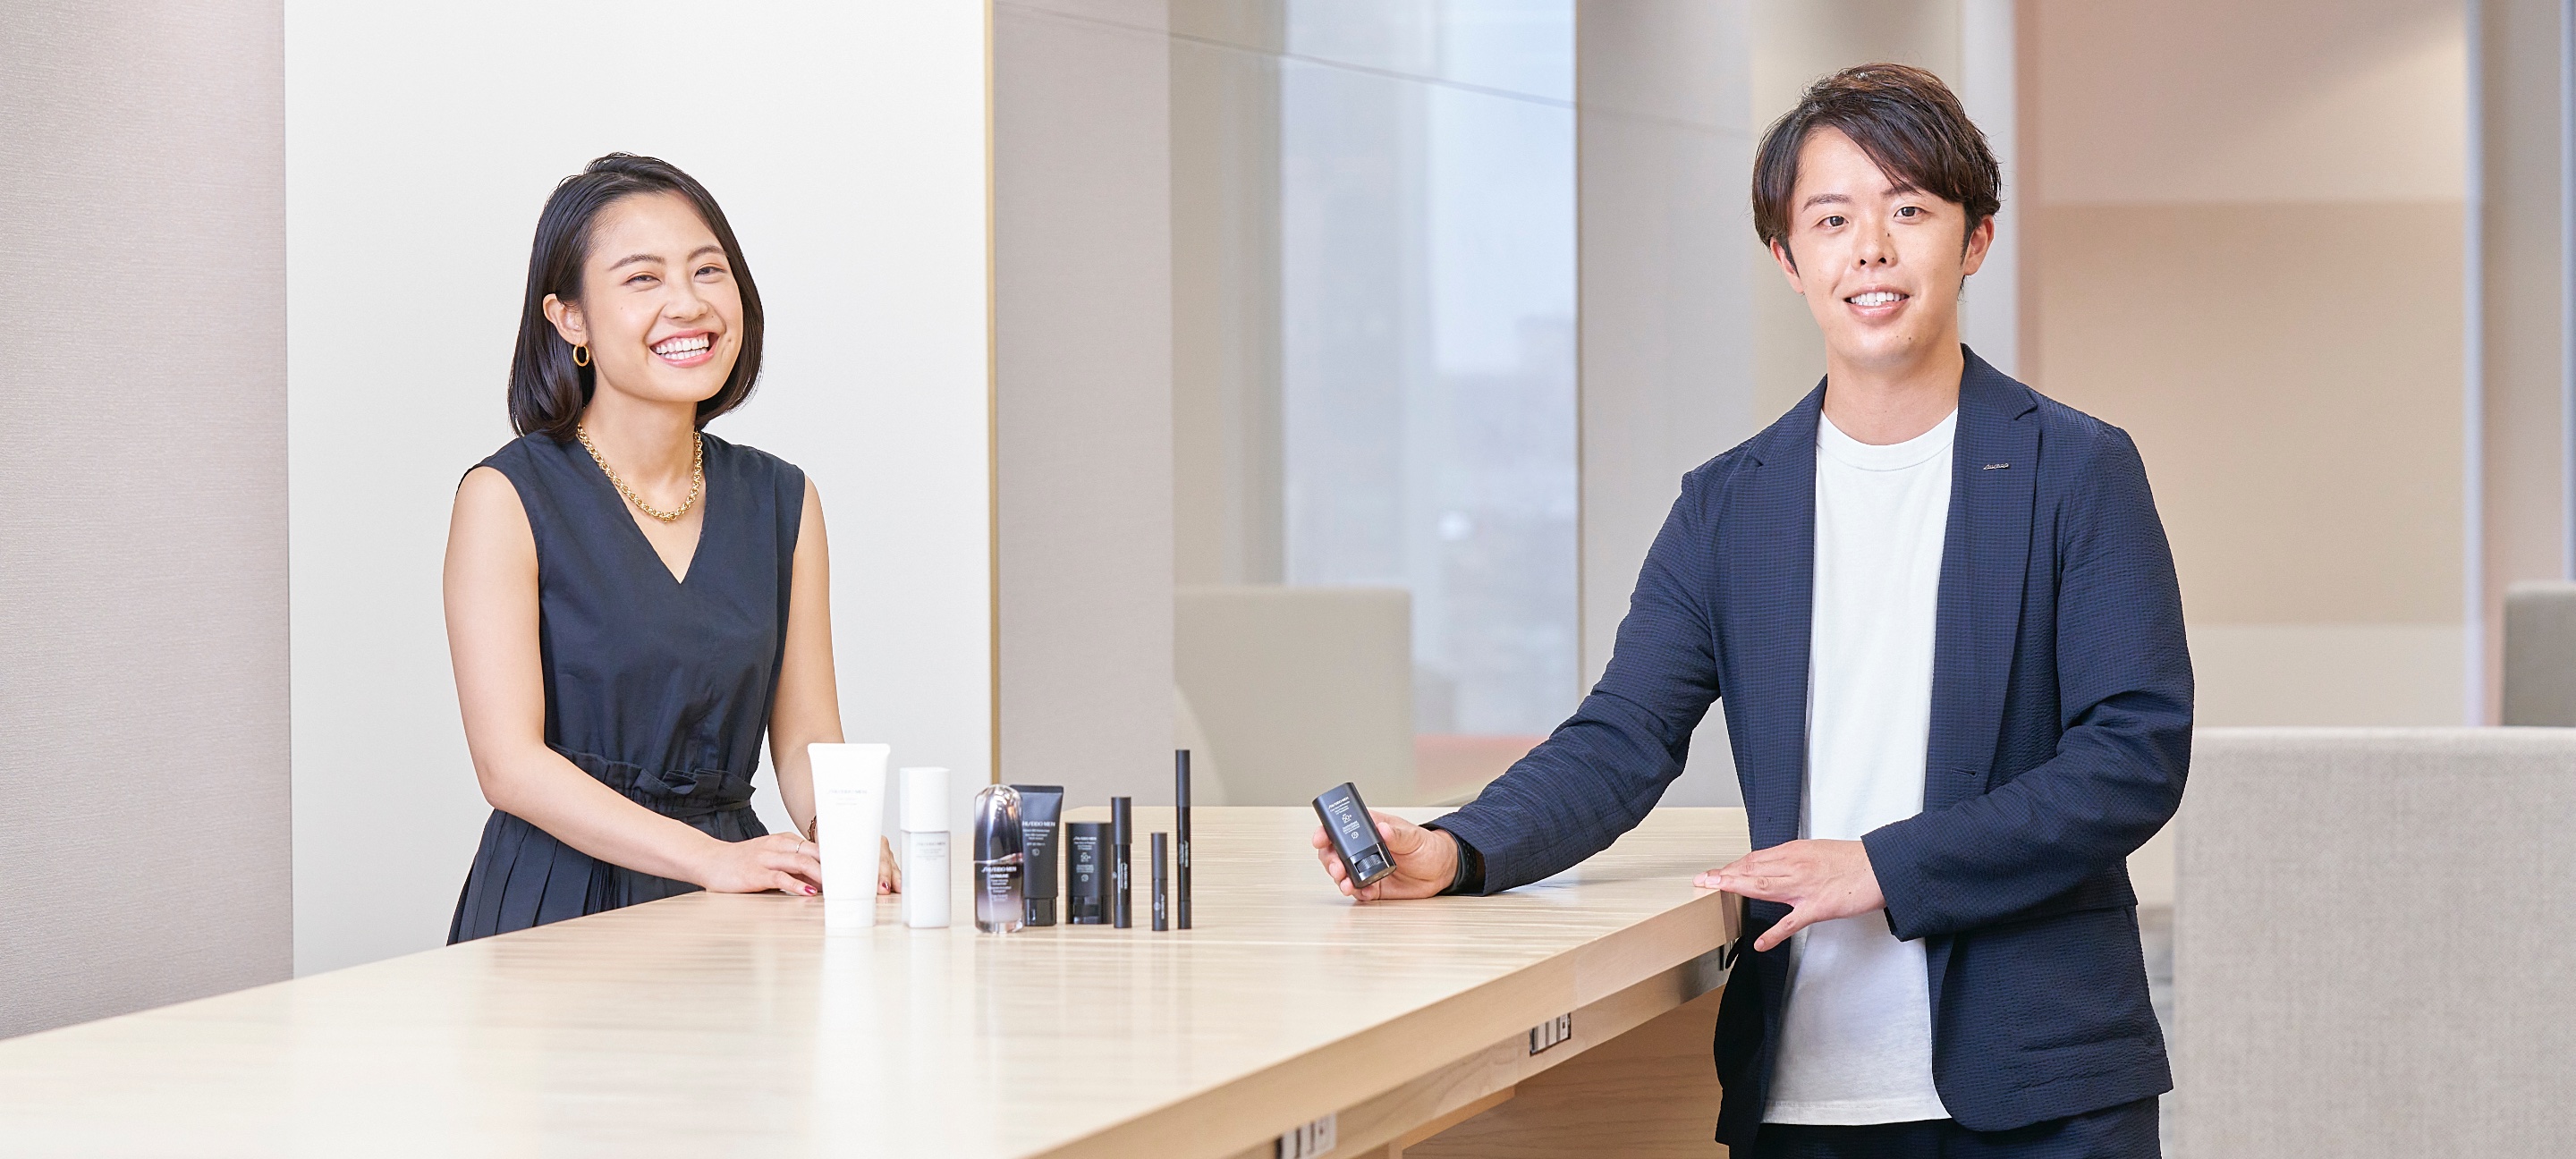 LIVEN UP YOUR LOOK, OWN YOUR FUTURE Envisioning the Future with the New SHISEIDO MEN